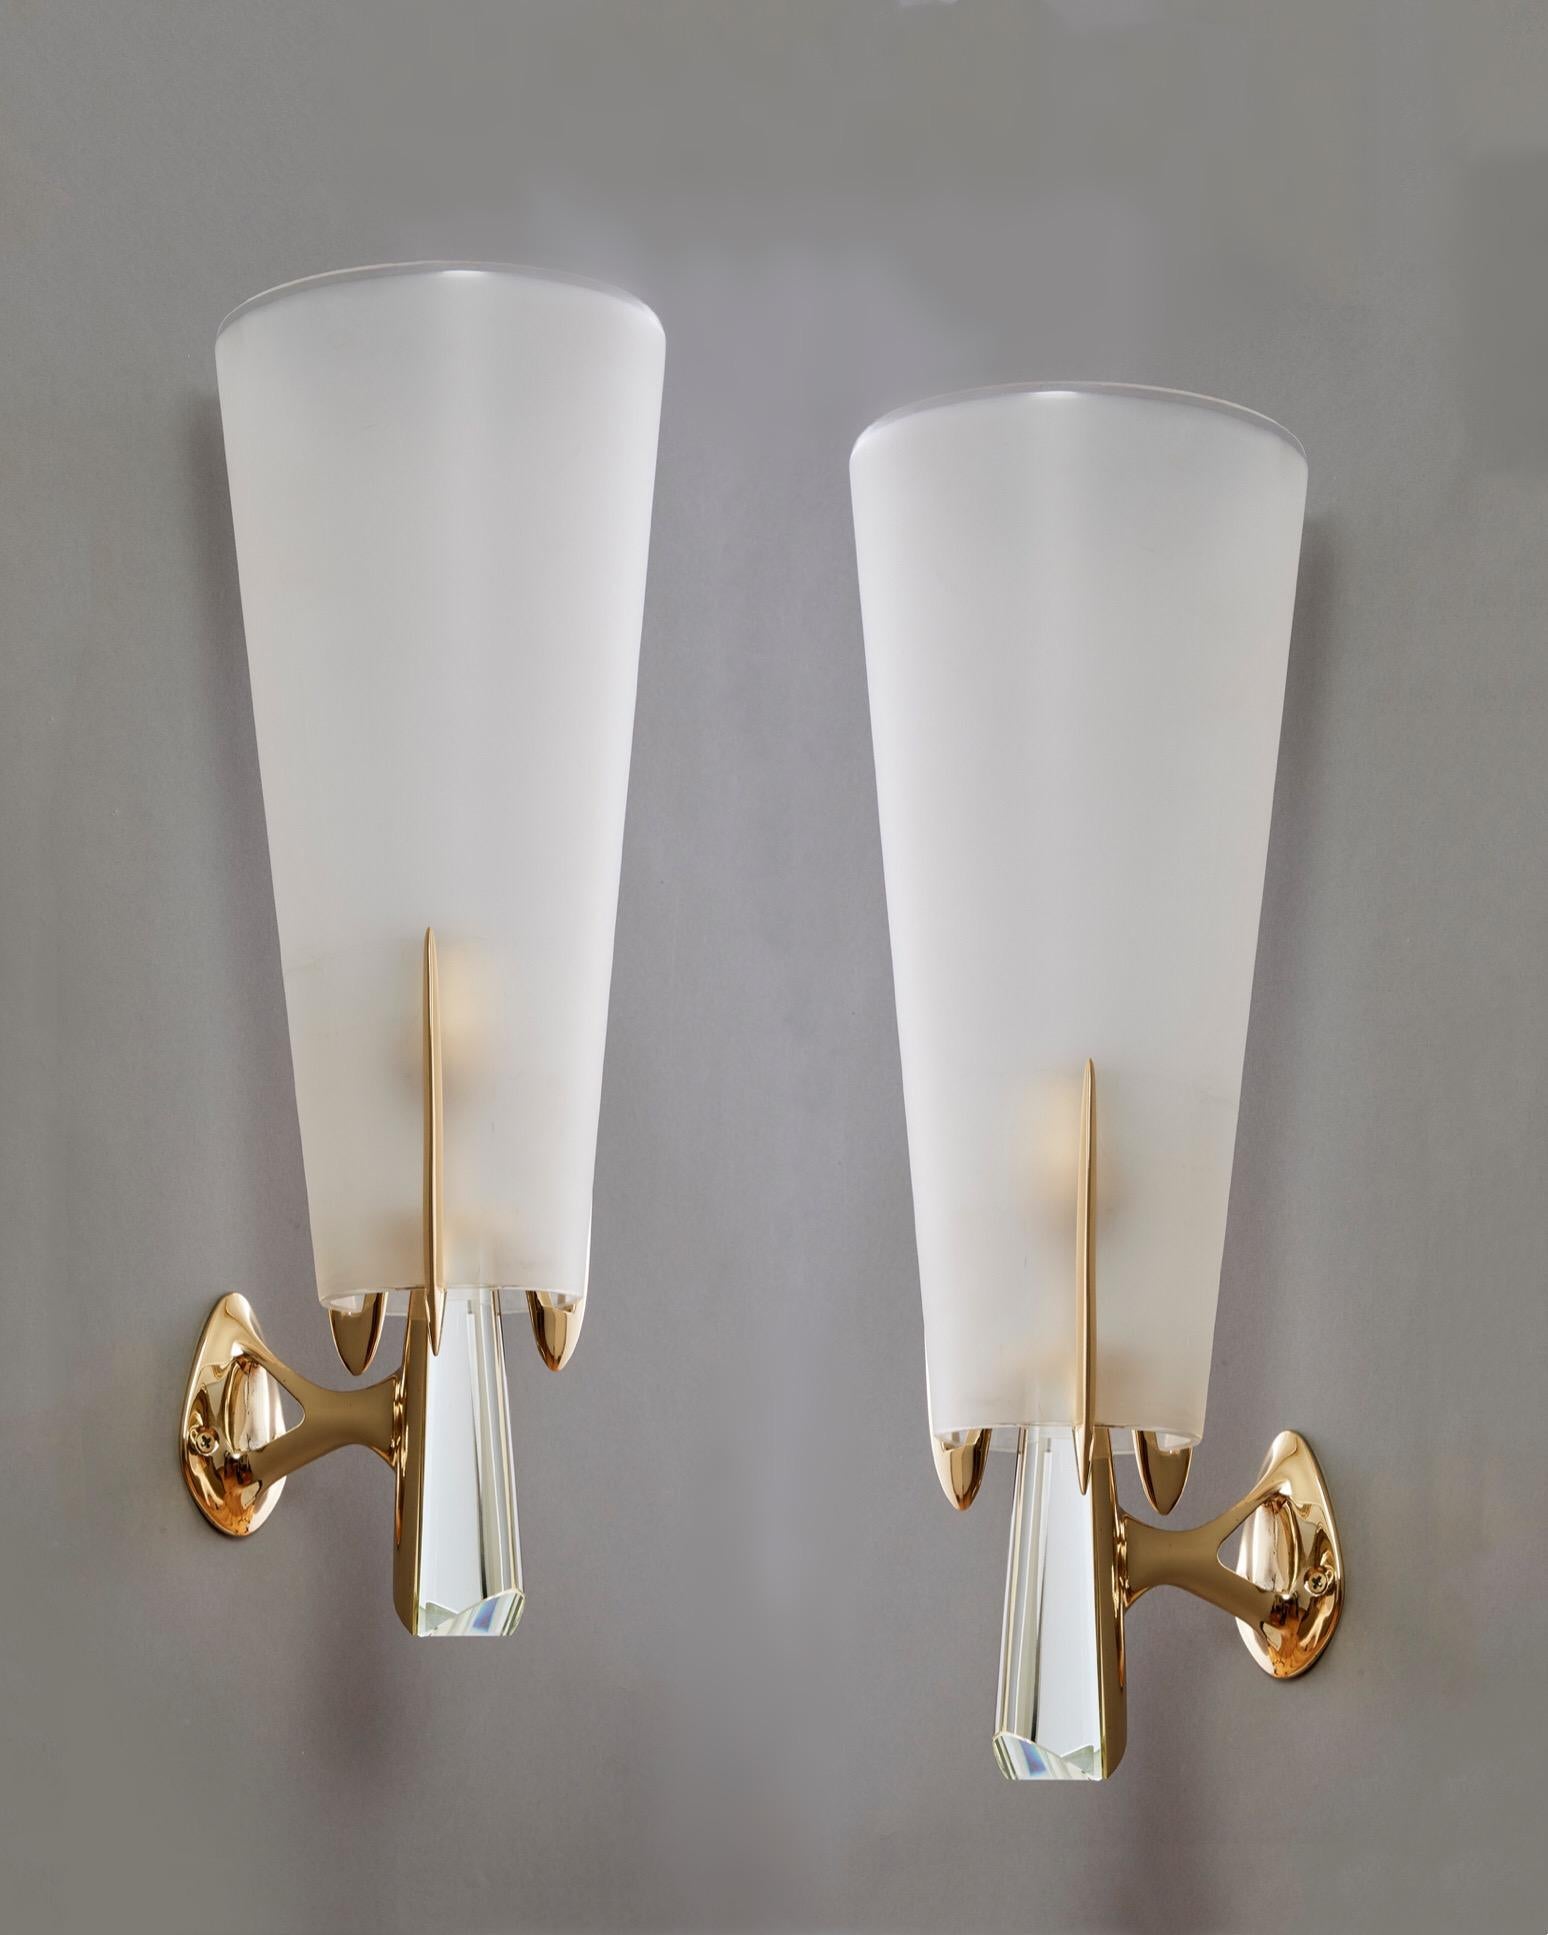 Max Ingrand (1908 - 1969)

An important pair of rare and exquisite sconces by Max Ingrand for Fontana Arte, in perfectly restored condition. Large conical shades in satin glass with a delicately beveled edge are supported by elegant trident mounts